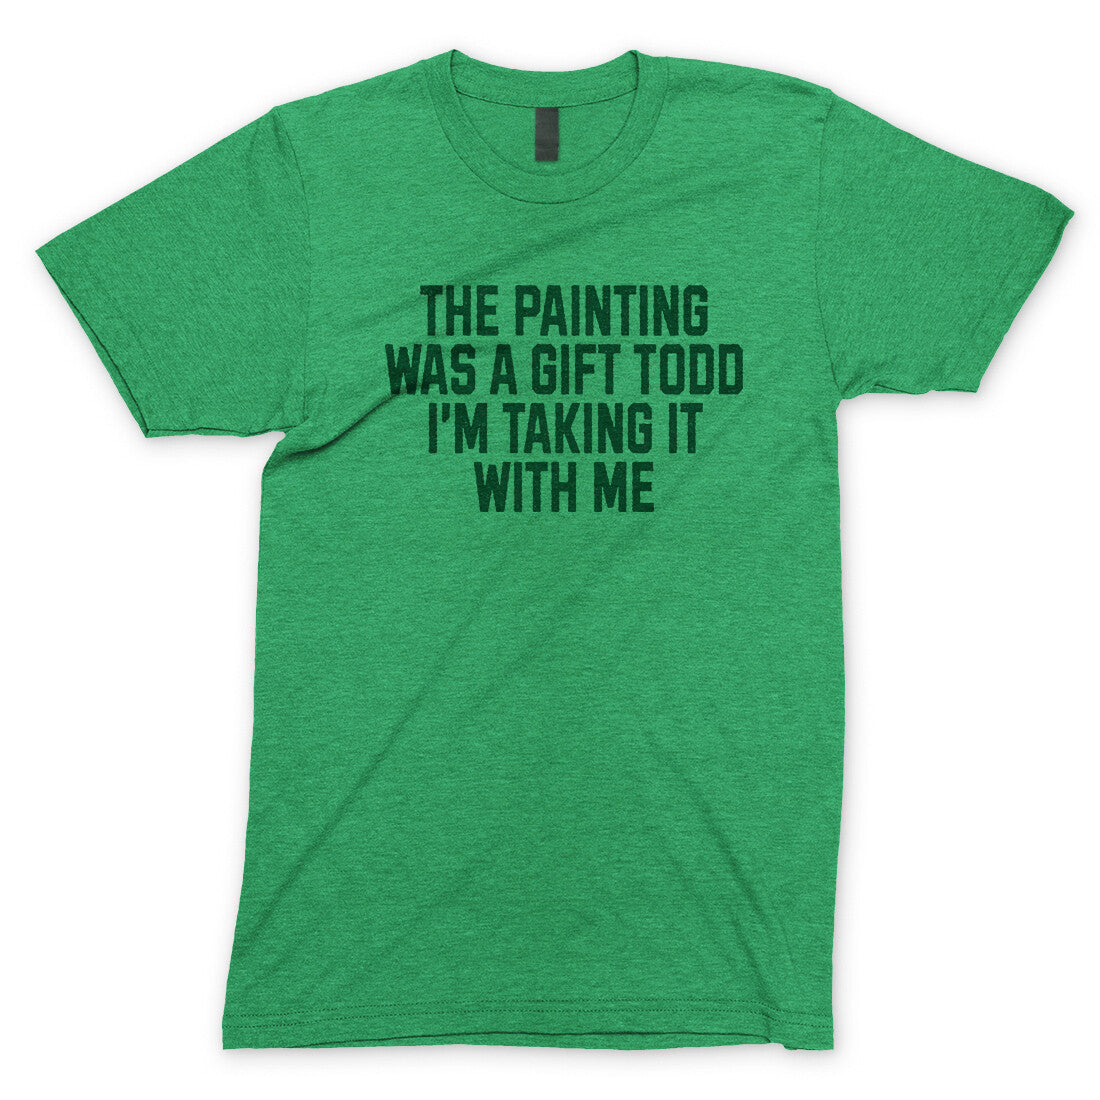 The Painting was a Gift Todd I'm Taking it With Me in Heather Irish Green Color